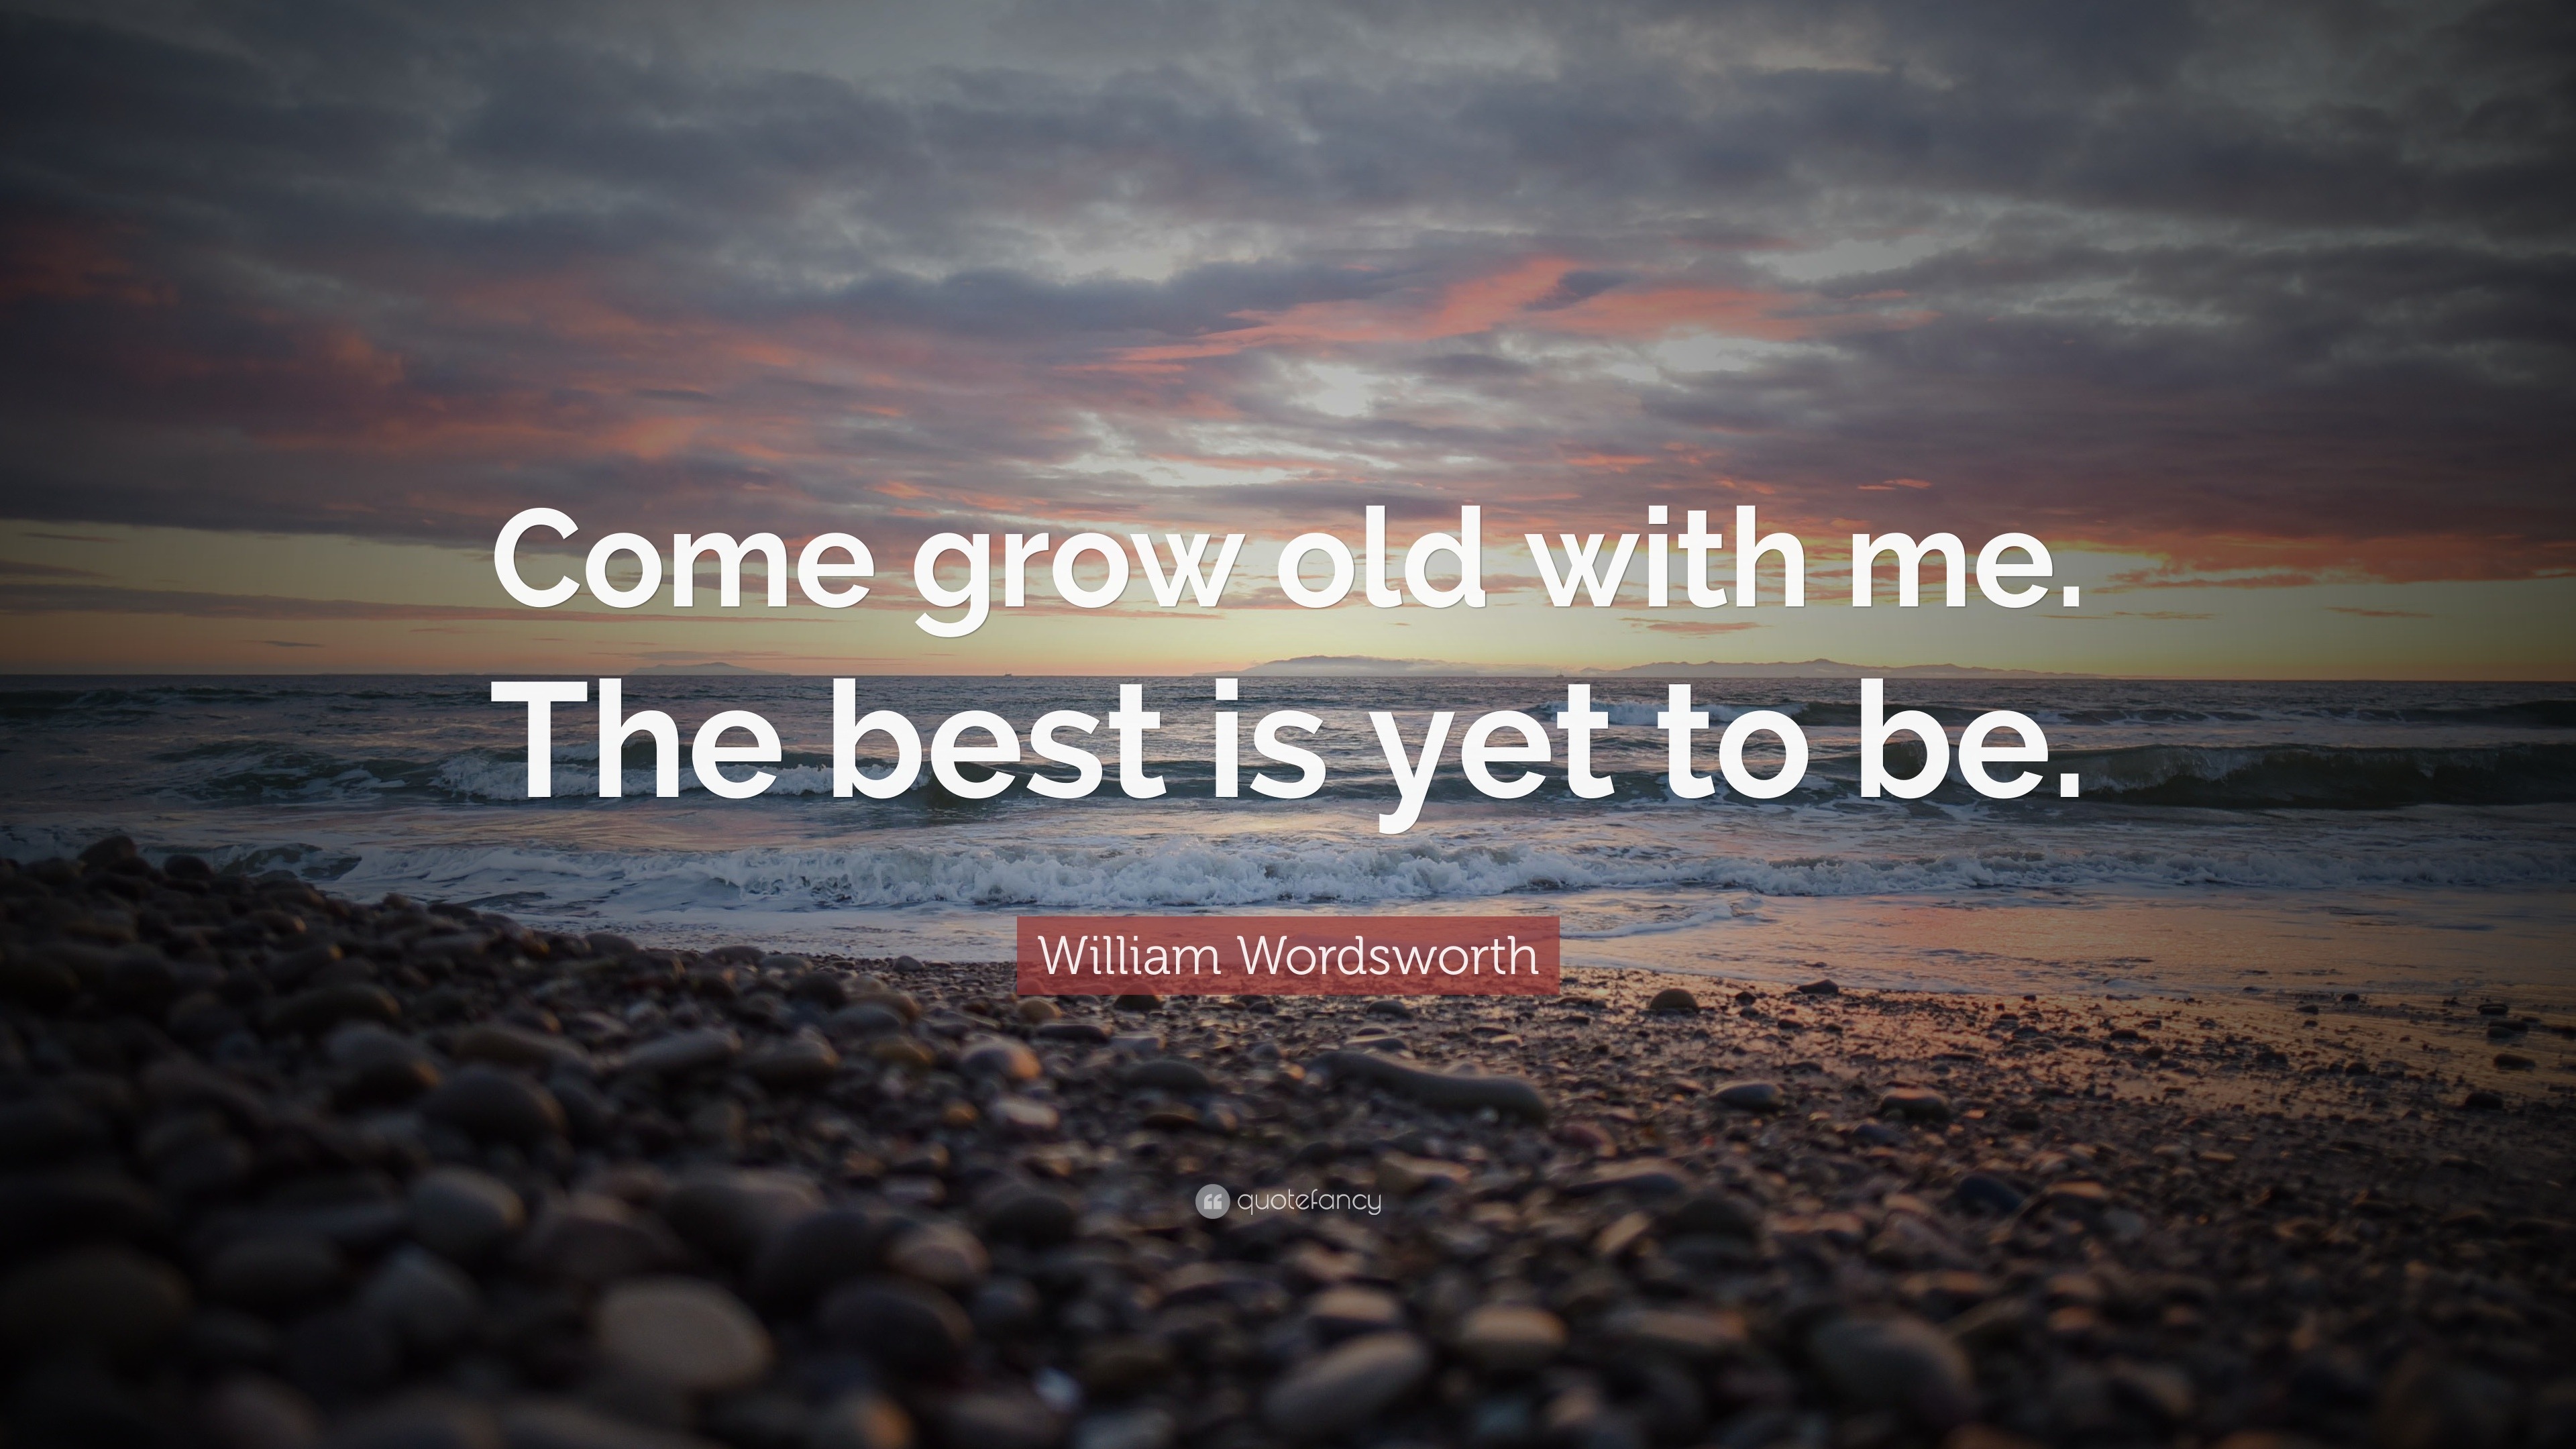 William Wordsworth Quote: “Come grow old with me. The best is yet to be.”